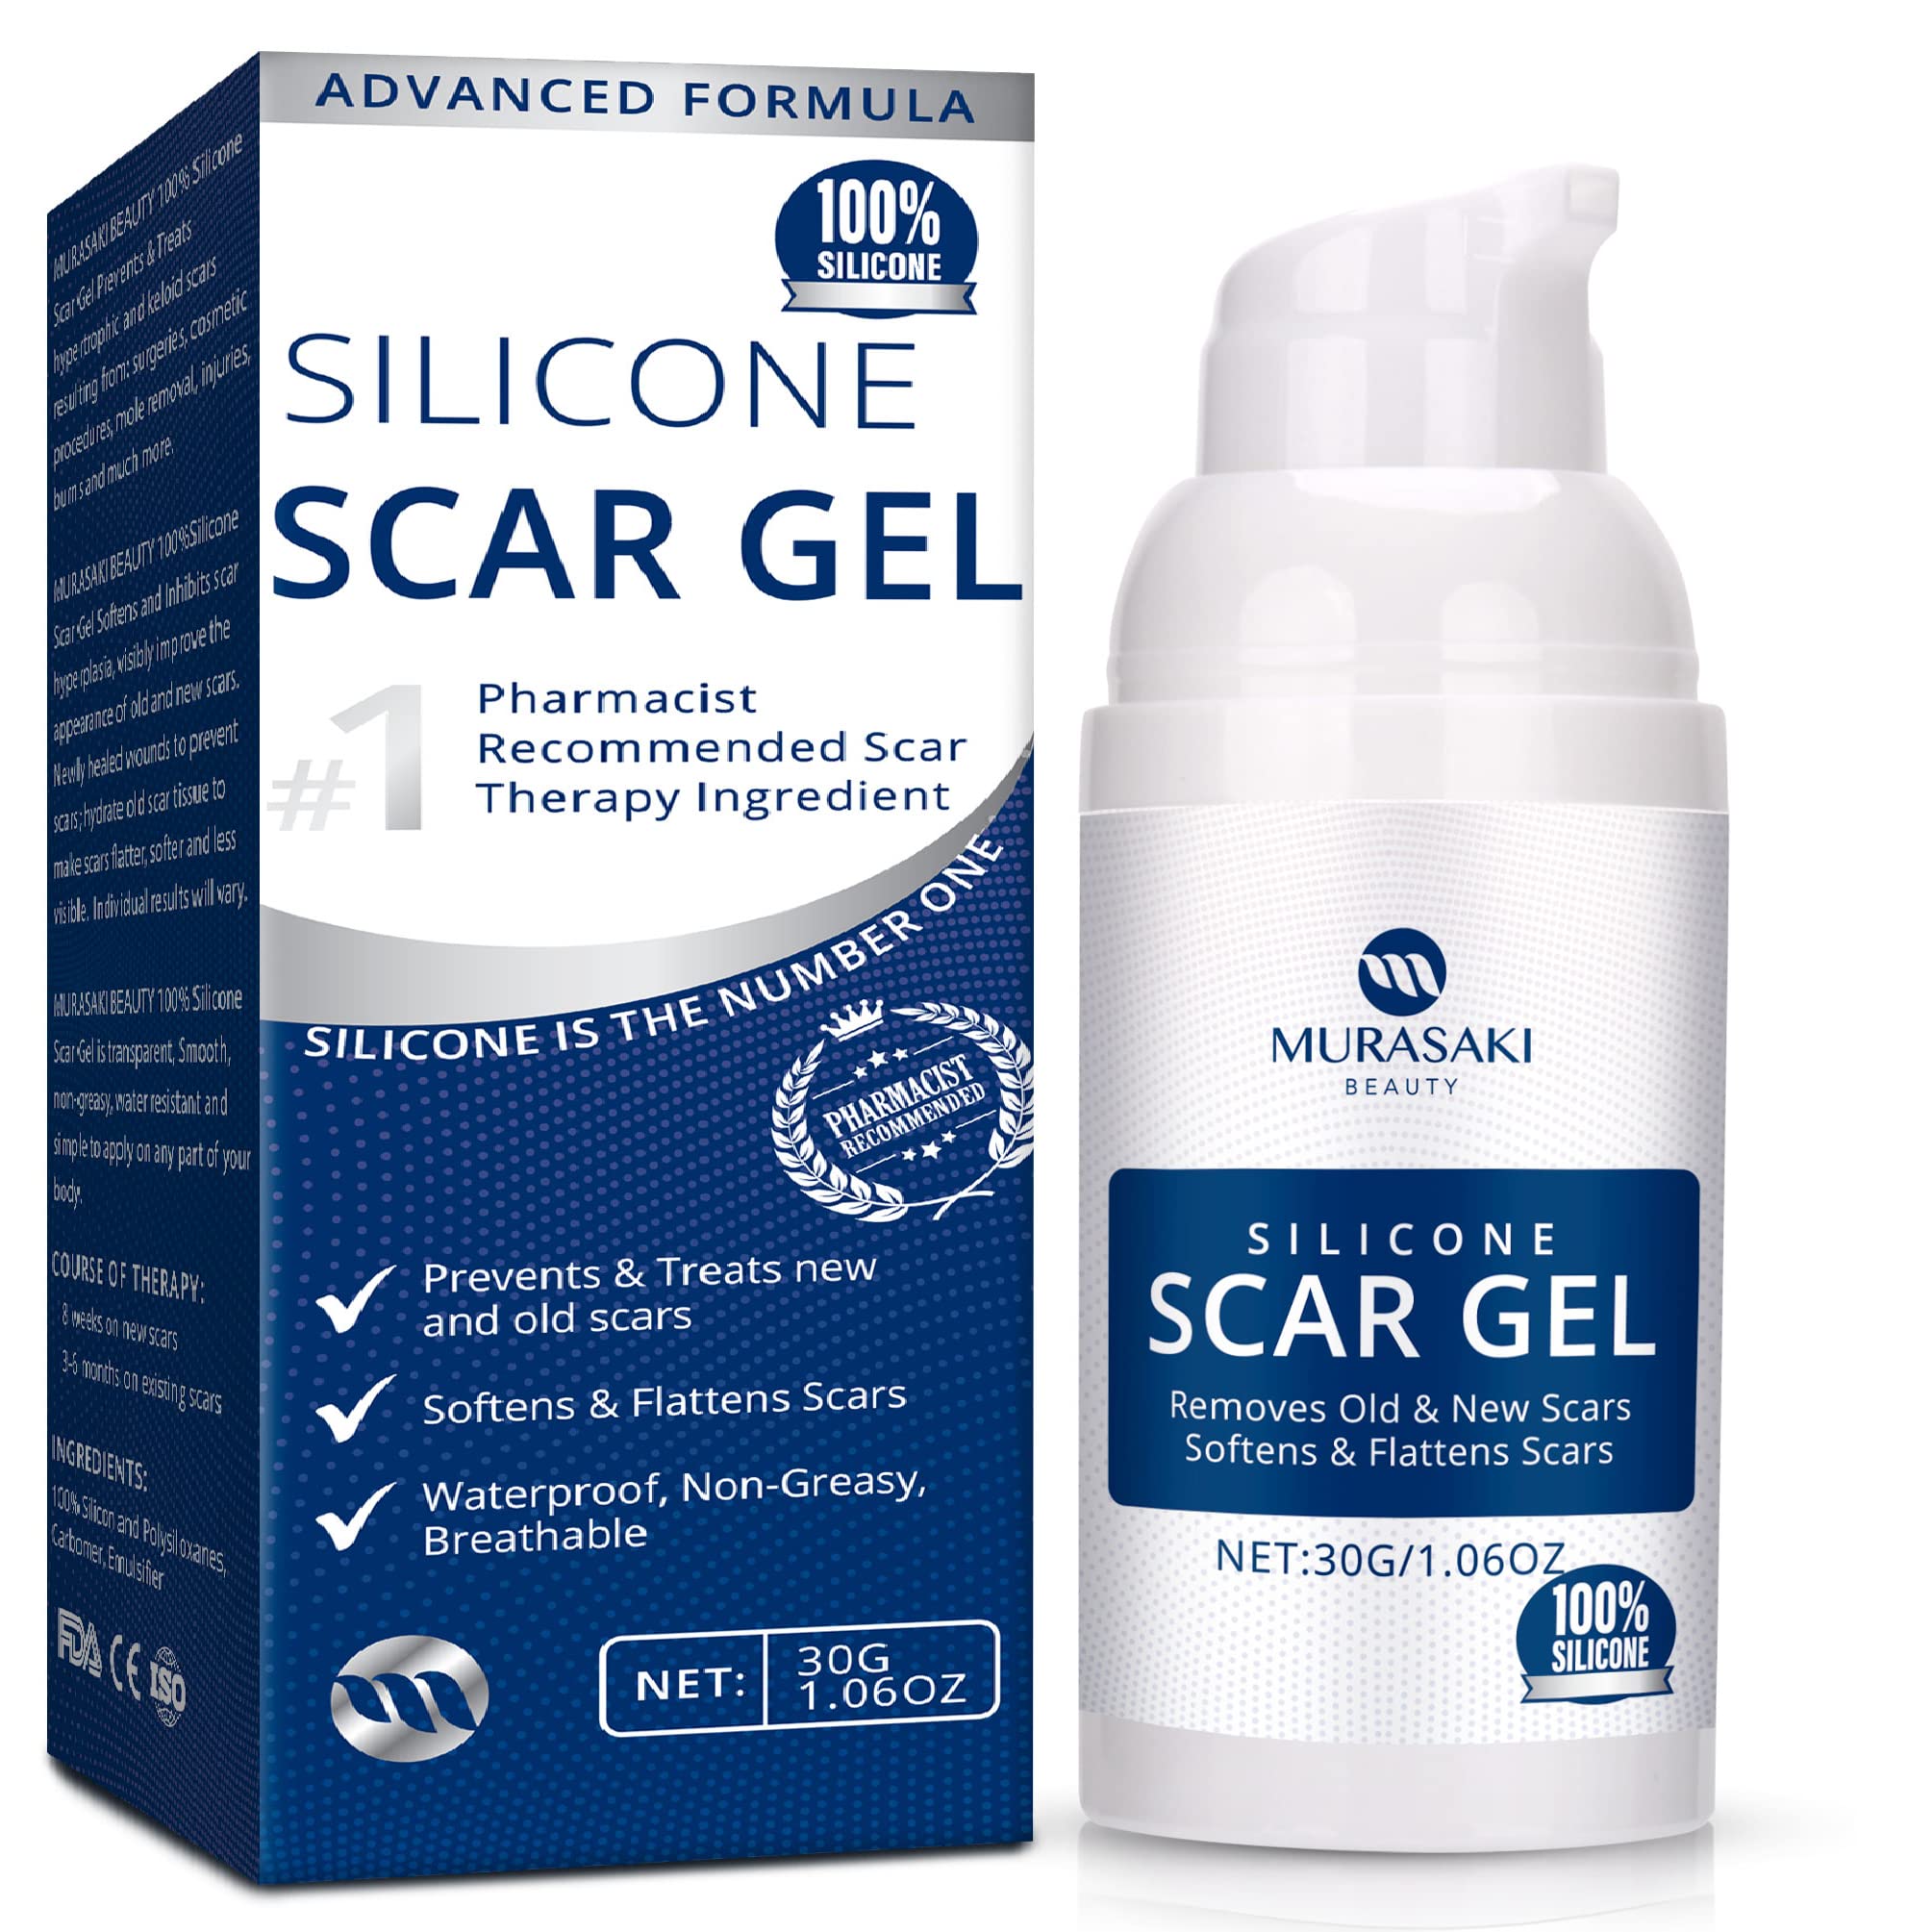 Silicone Scar Gel 30g Scar Cream,Scar Removal,Scar Treatment, Scar Removal Cream for C-Section, Stretch Marks, Acne, Surgery, Effective for Both Old and New Scars